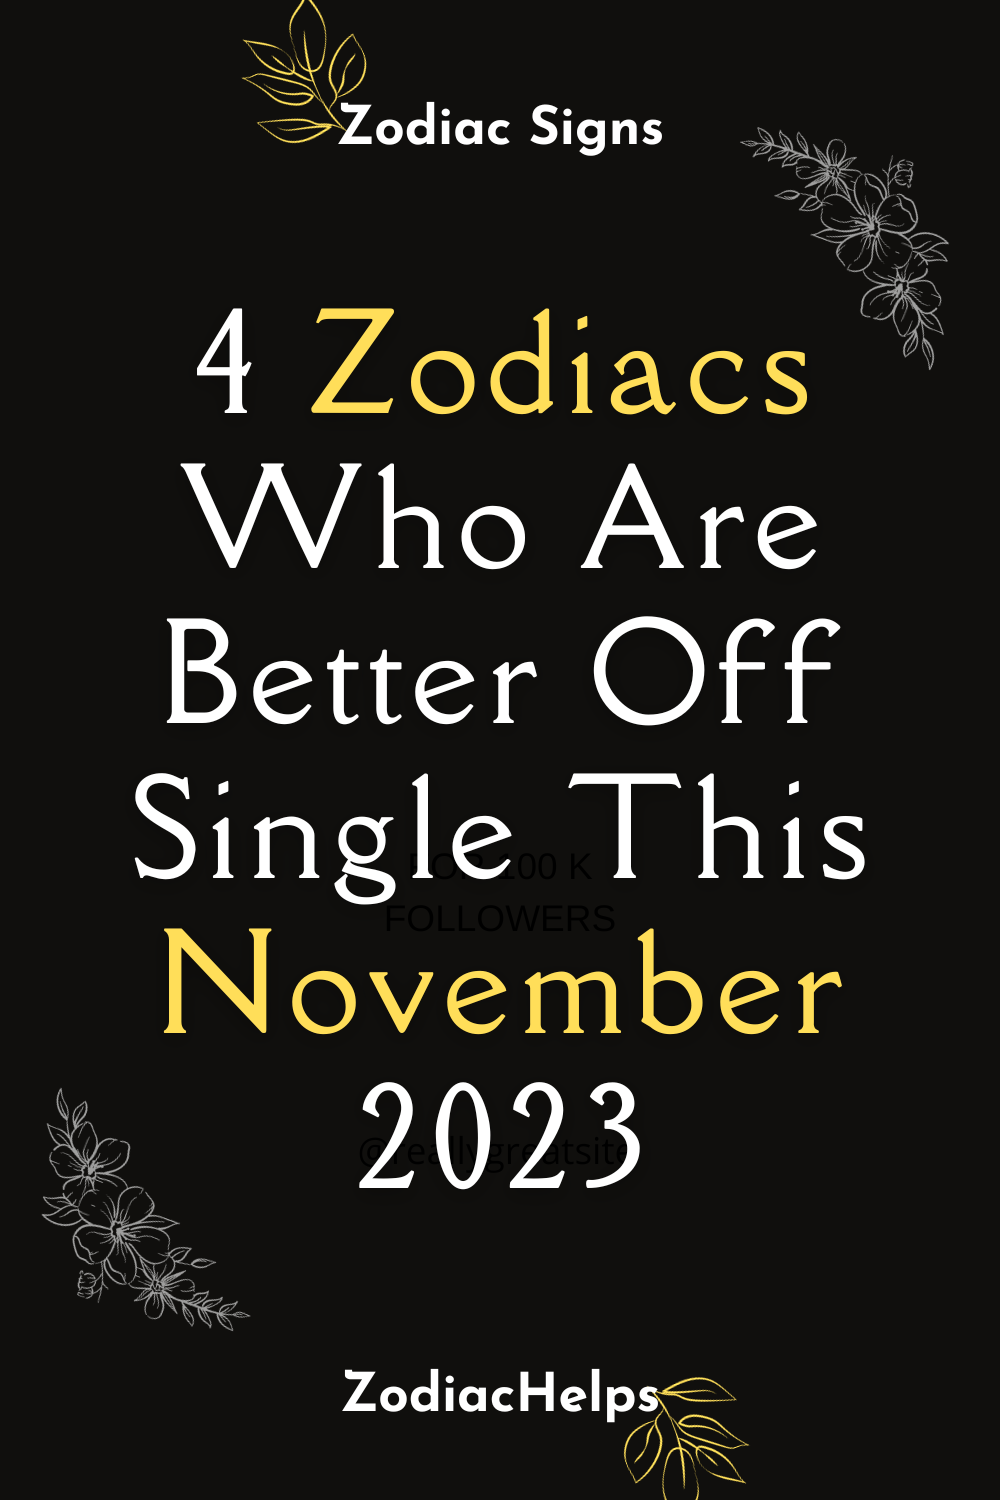 4 Zodiacs Who Are Better Off Single This November 2023